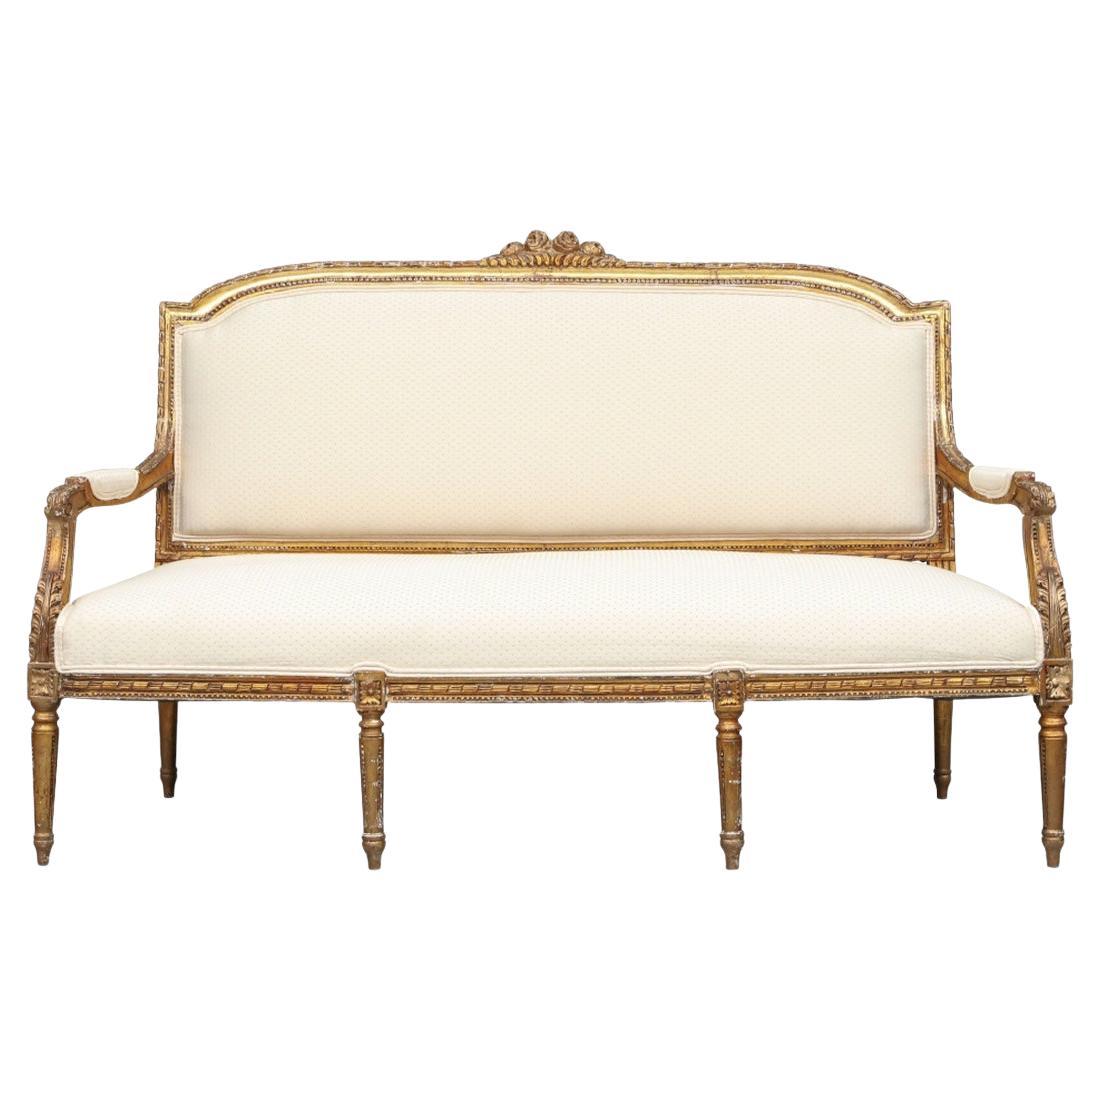 Elegant Antique French Carved and Gilt Settee in Louis XVI Style